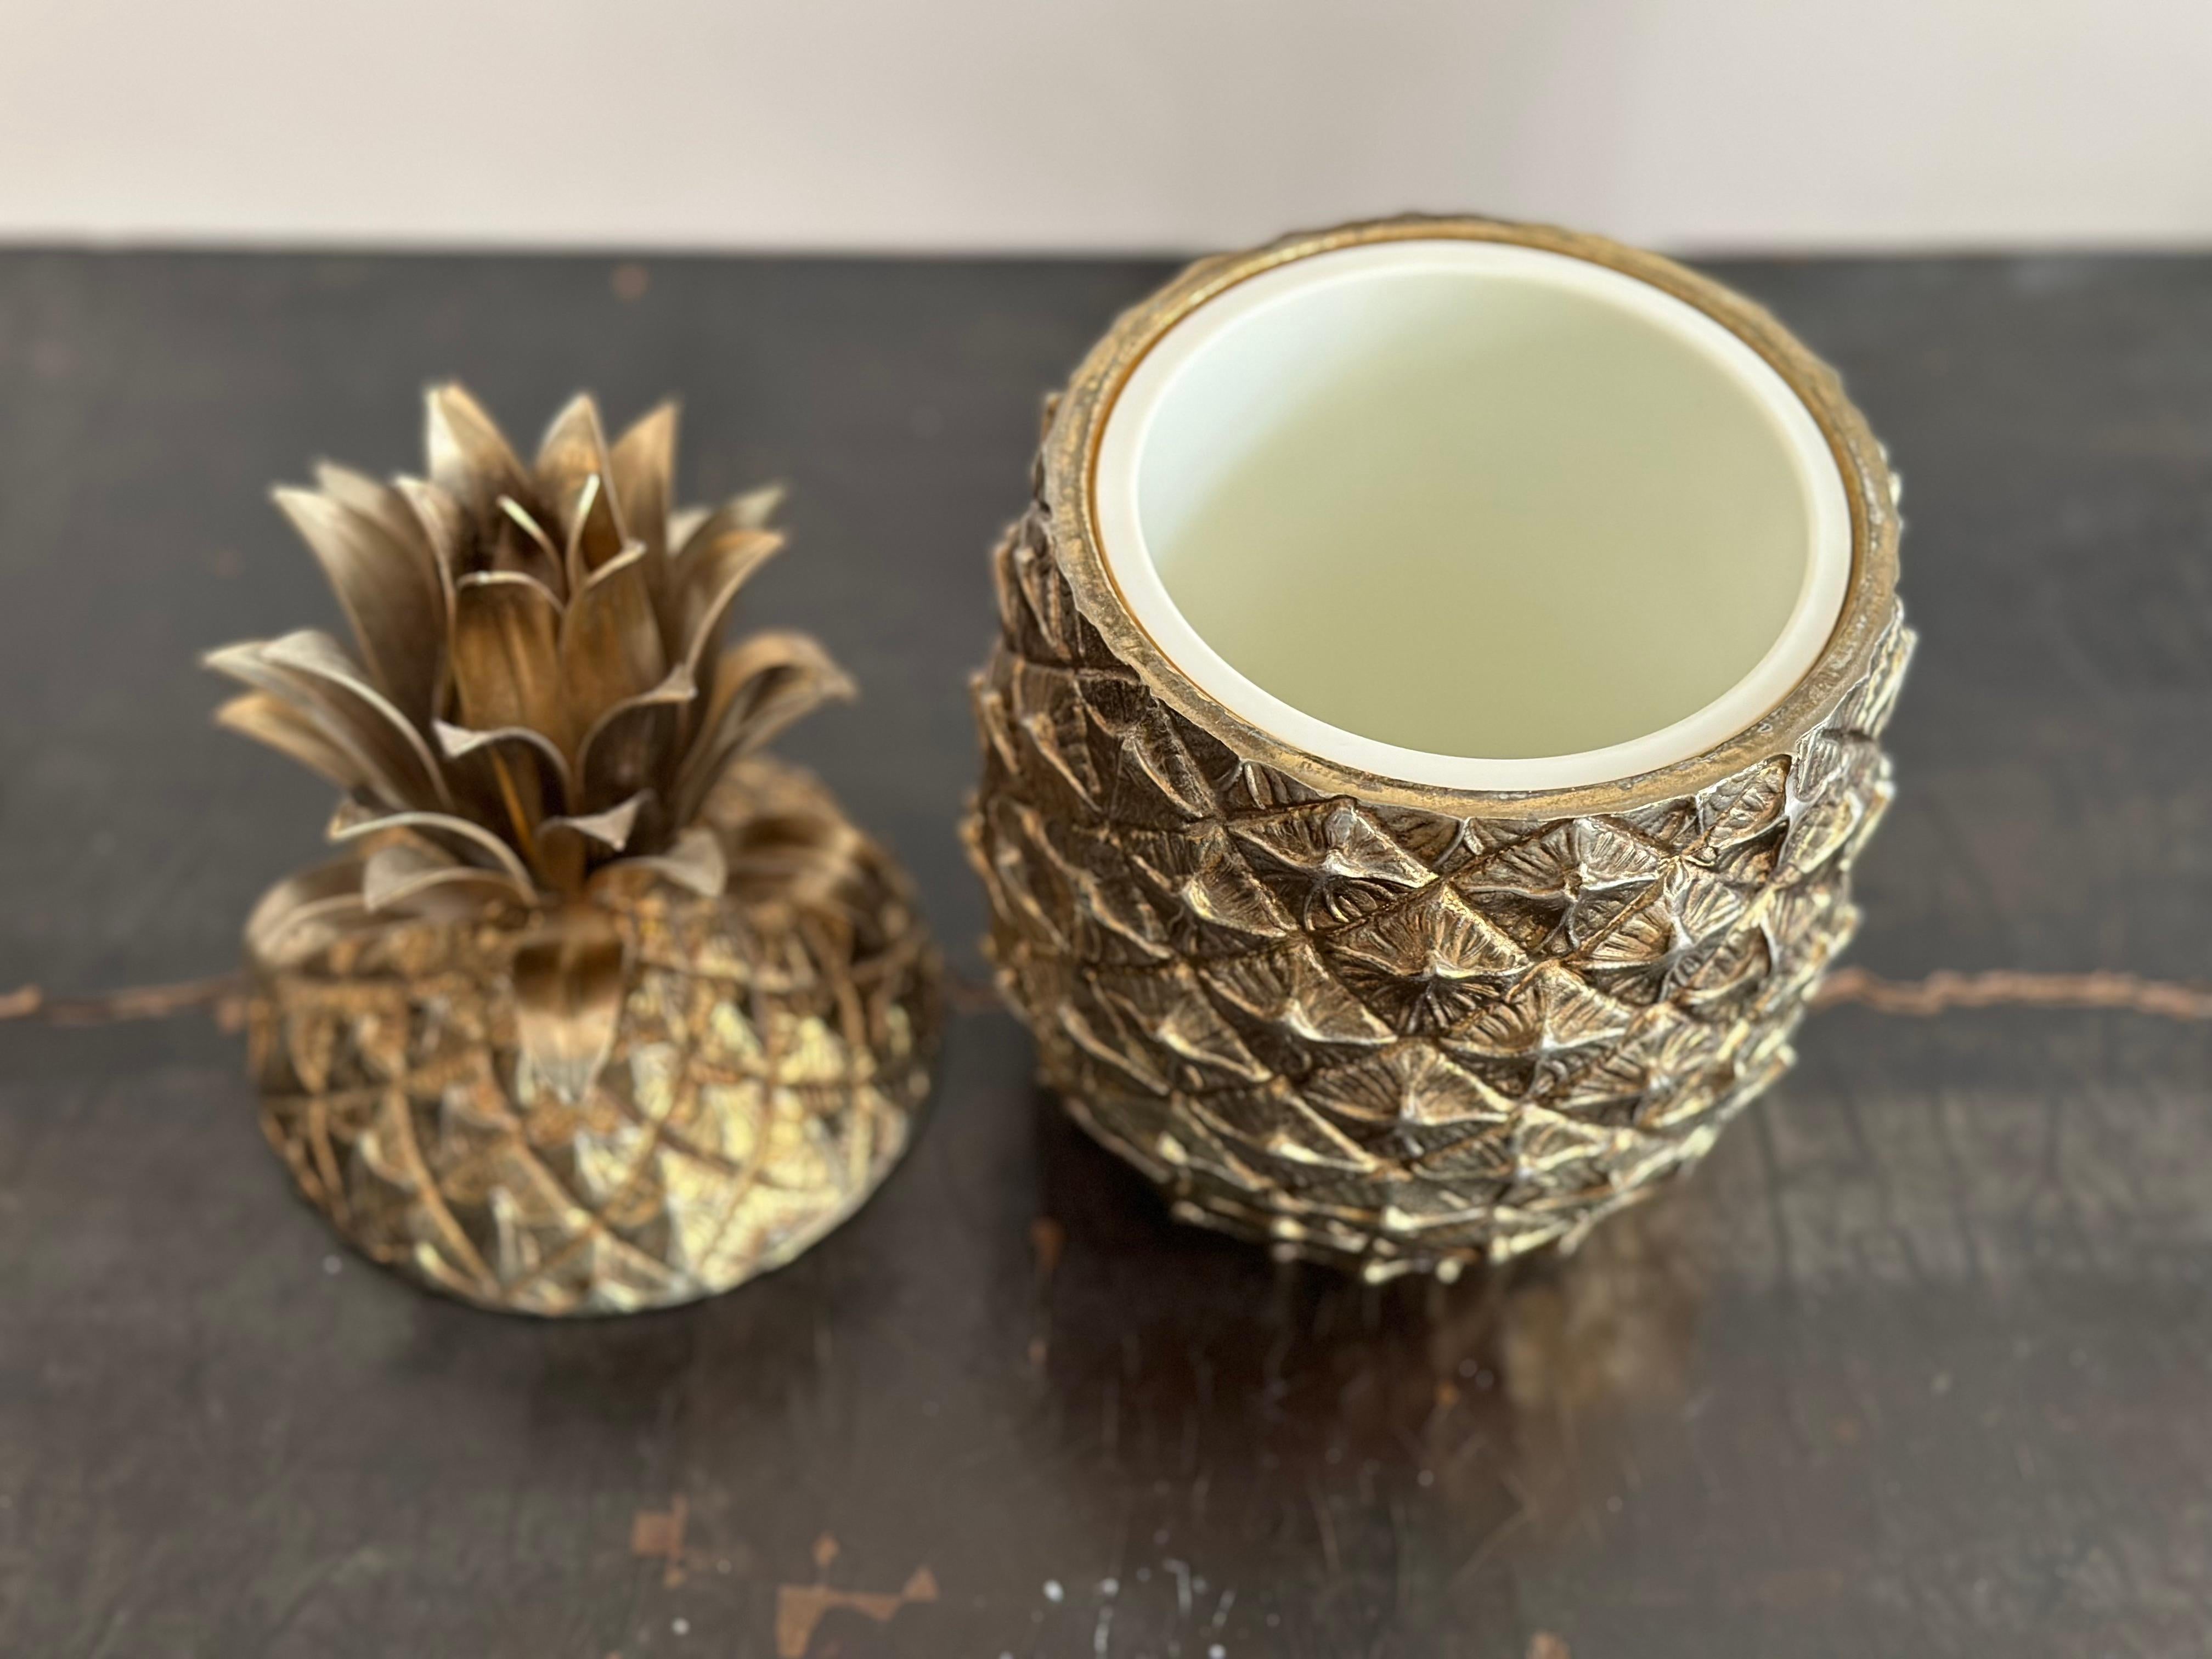  Golden Mauro Manetti Pineapple Ice Bucket from Florence, Italy, circa 1970 For Sale 1